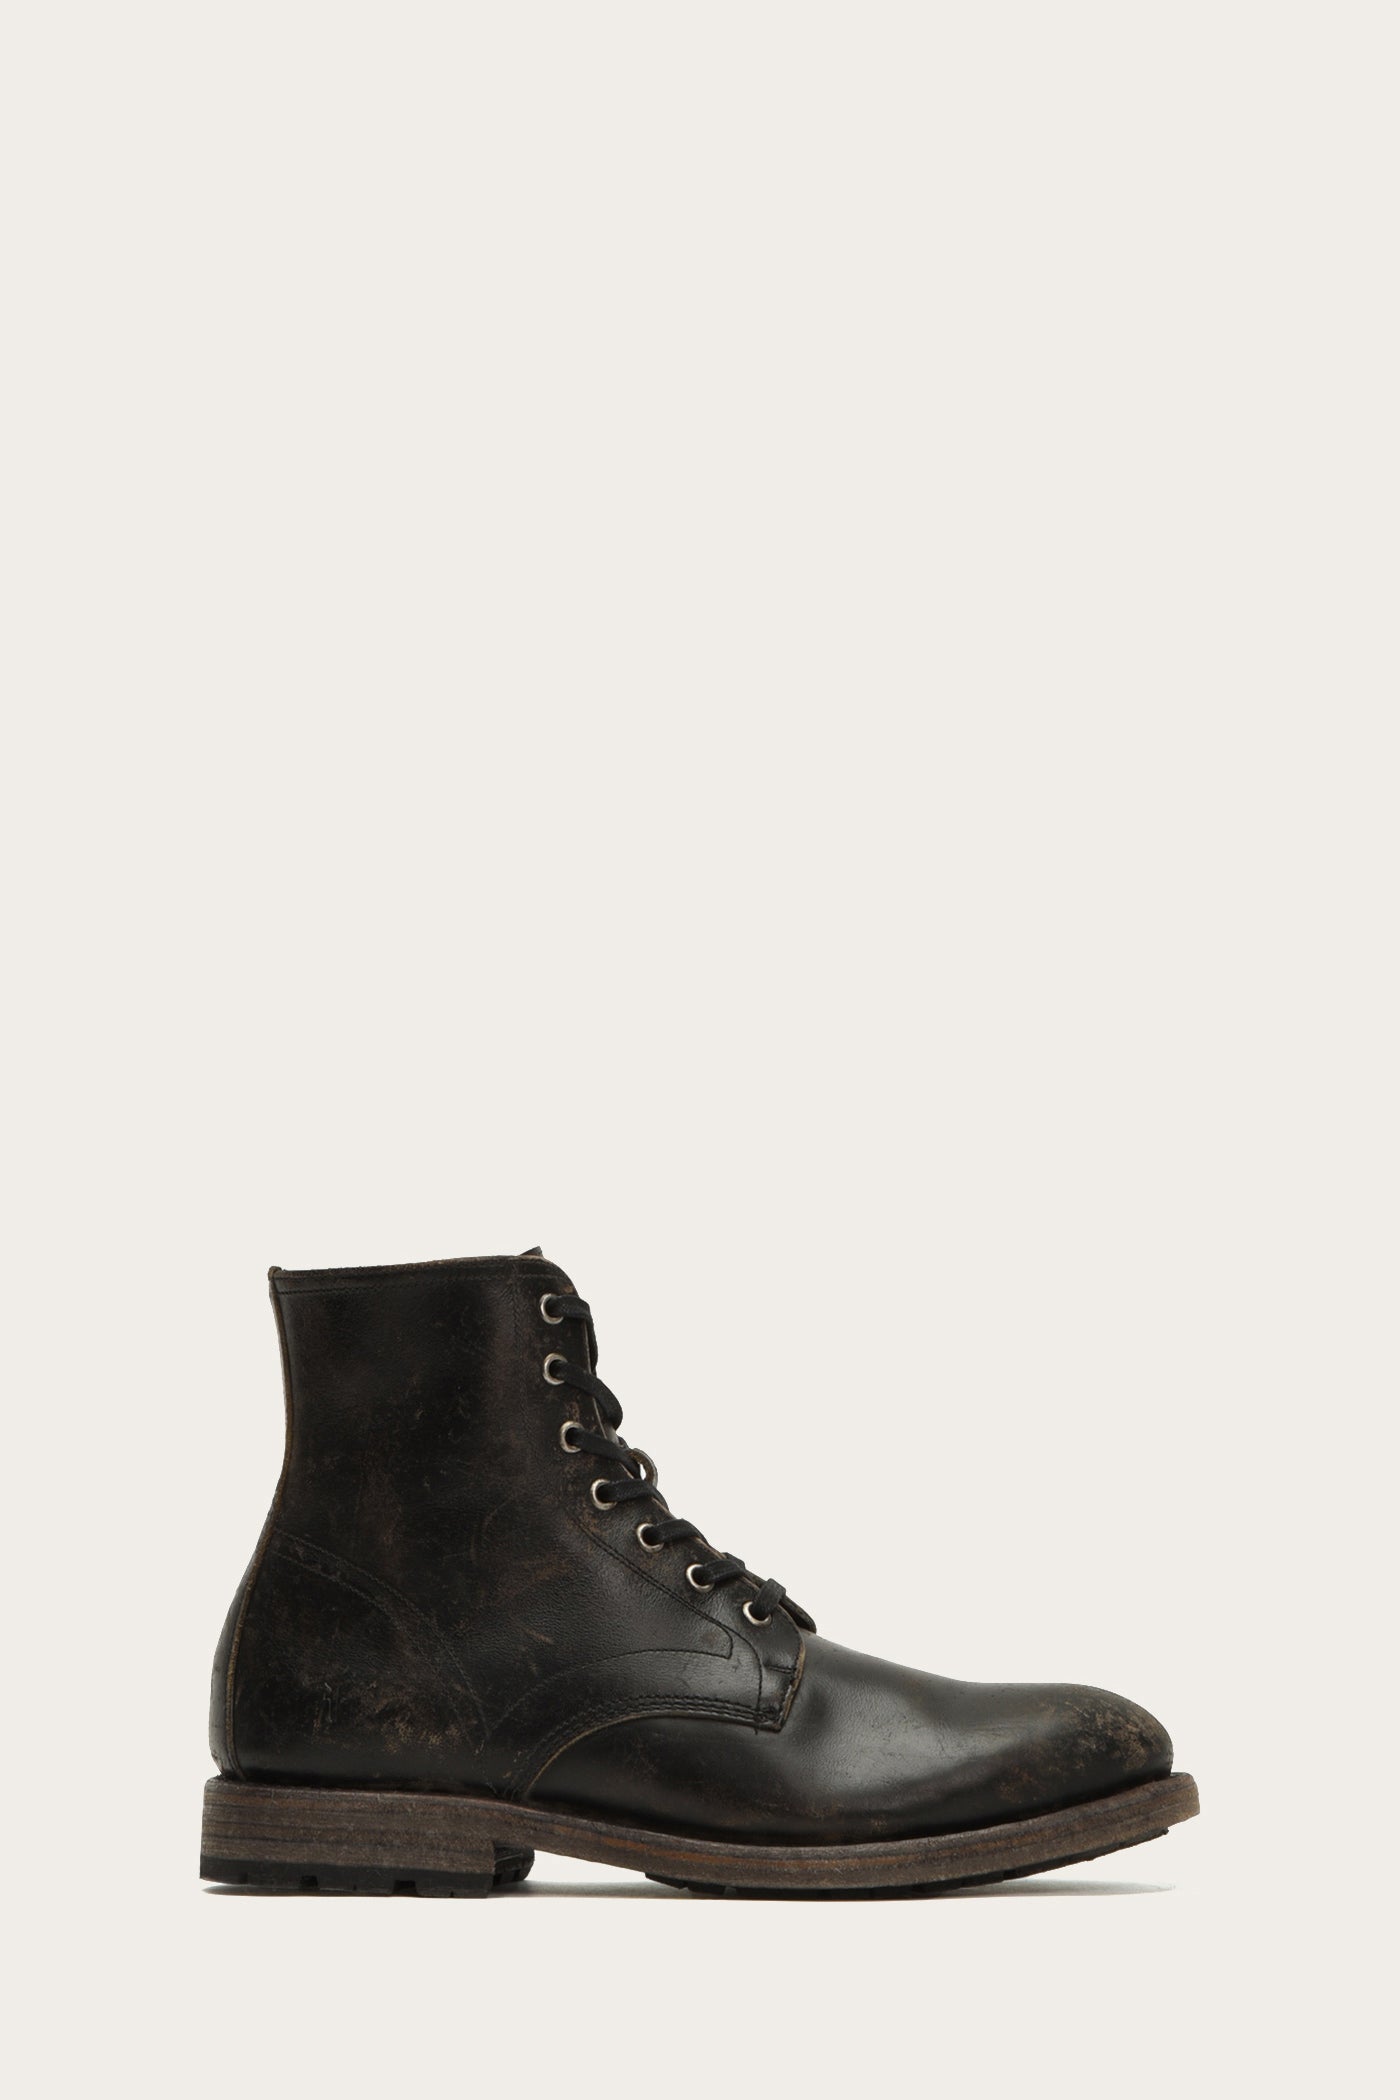 frye men's bowery lace up combat boot